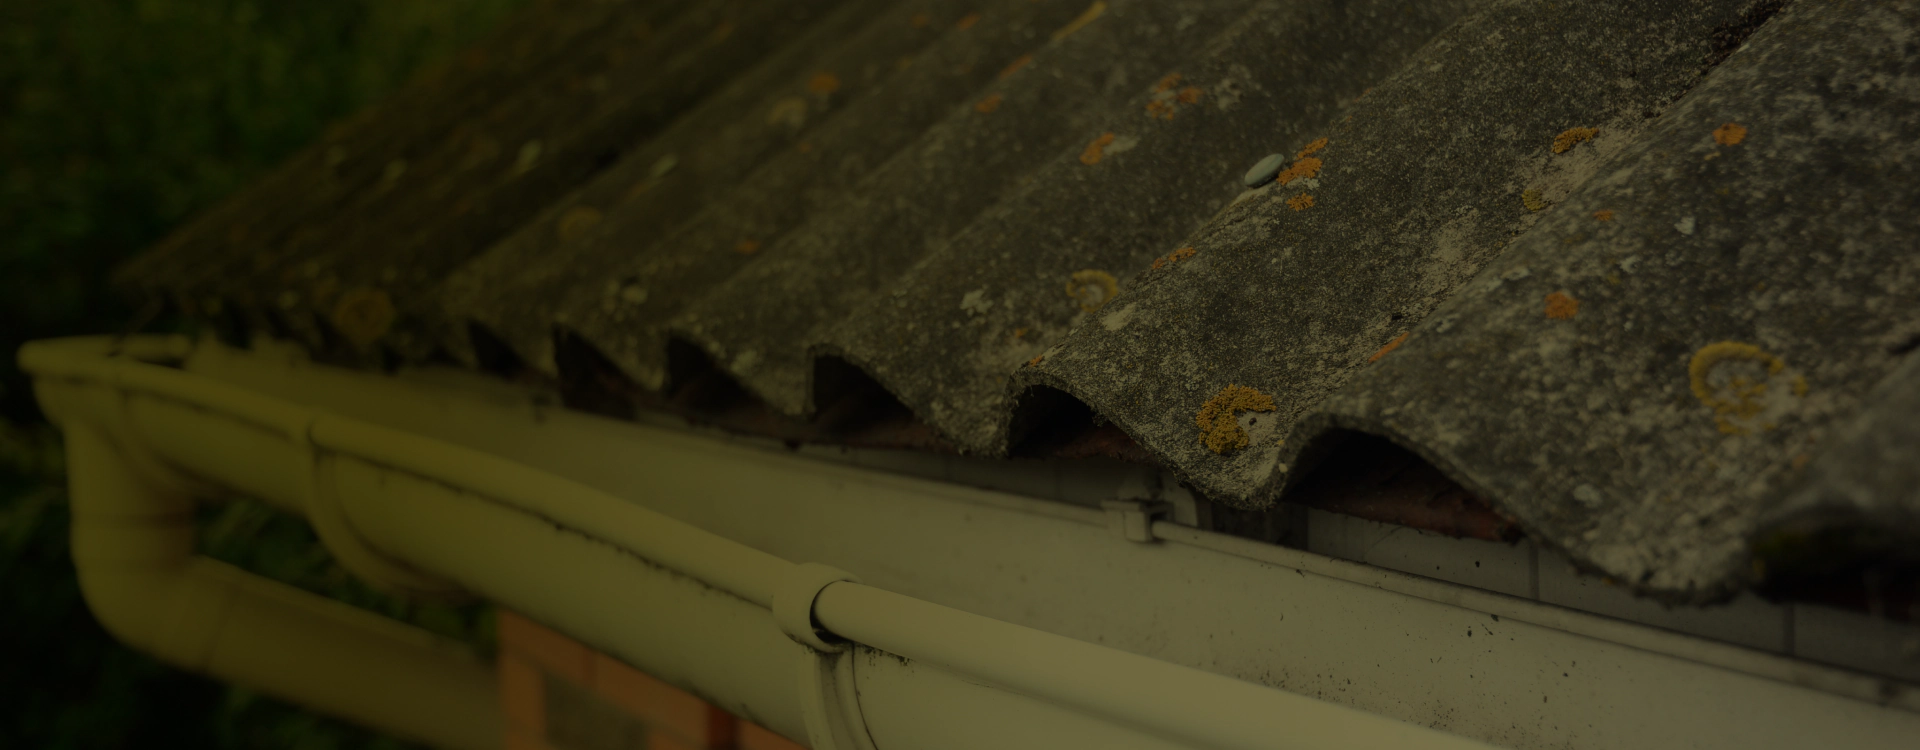 roof with asbestos